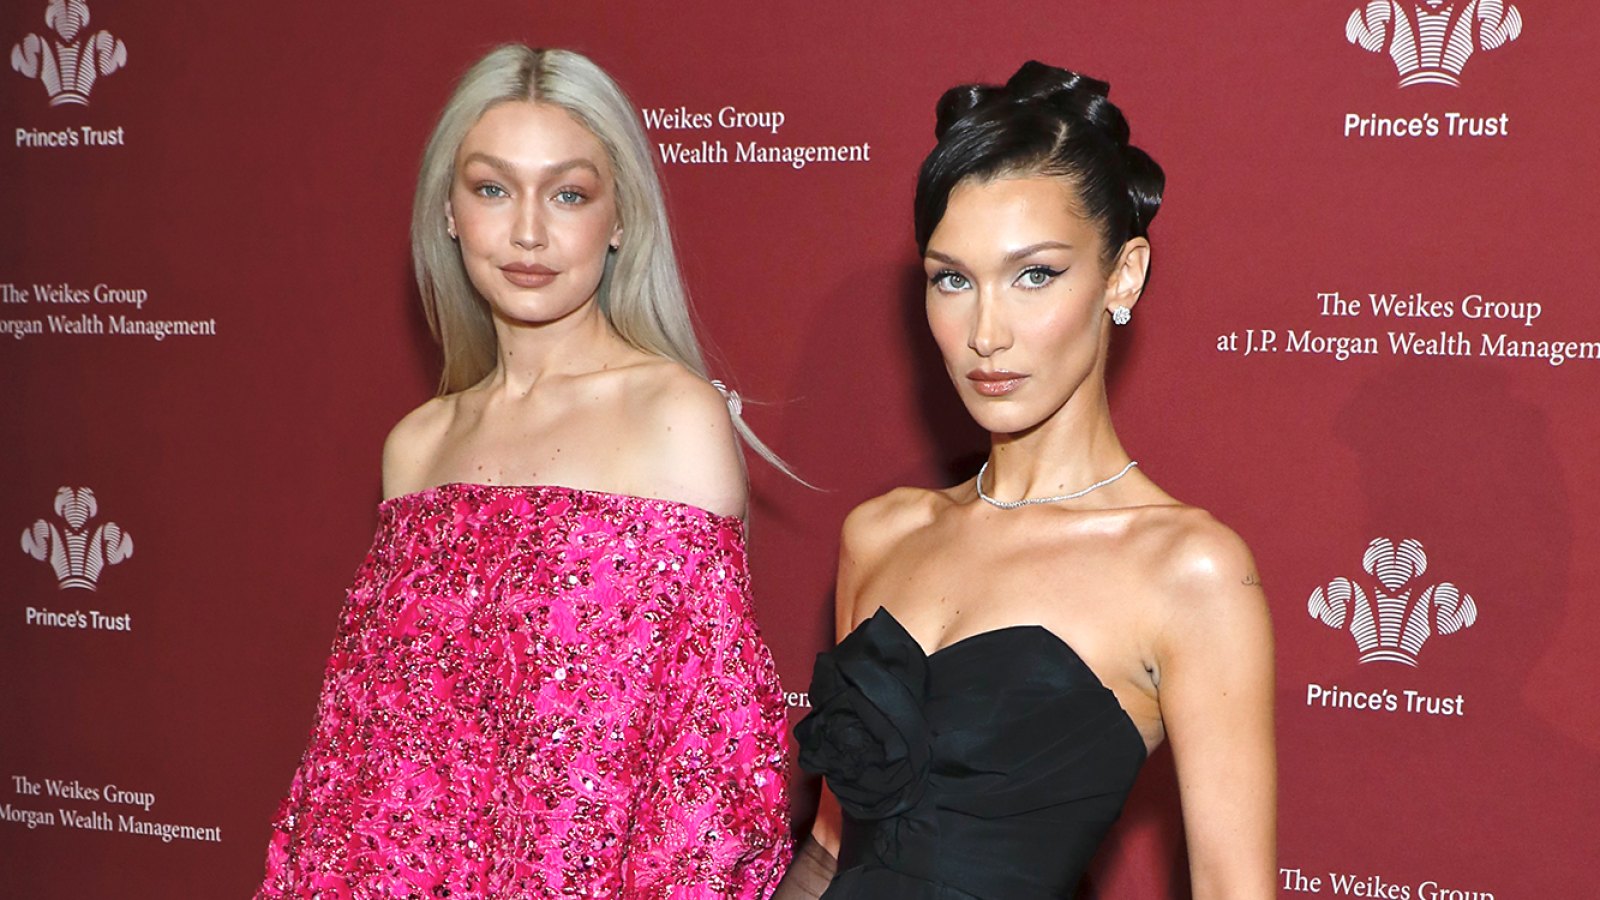 Bella Hadid: I will never allow anyone to forget about our